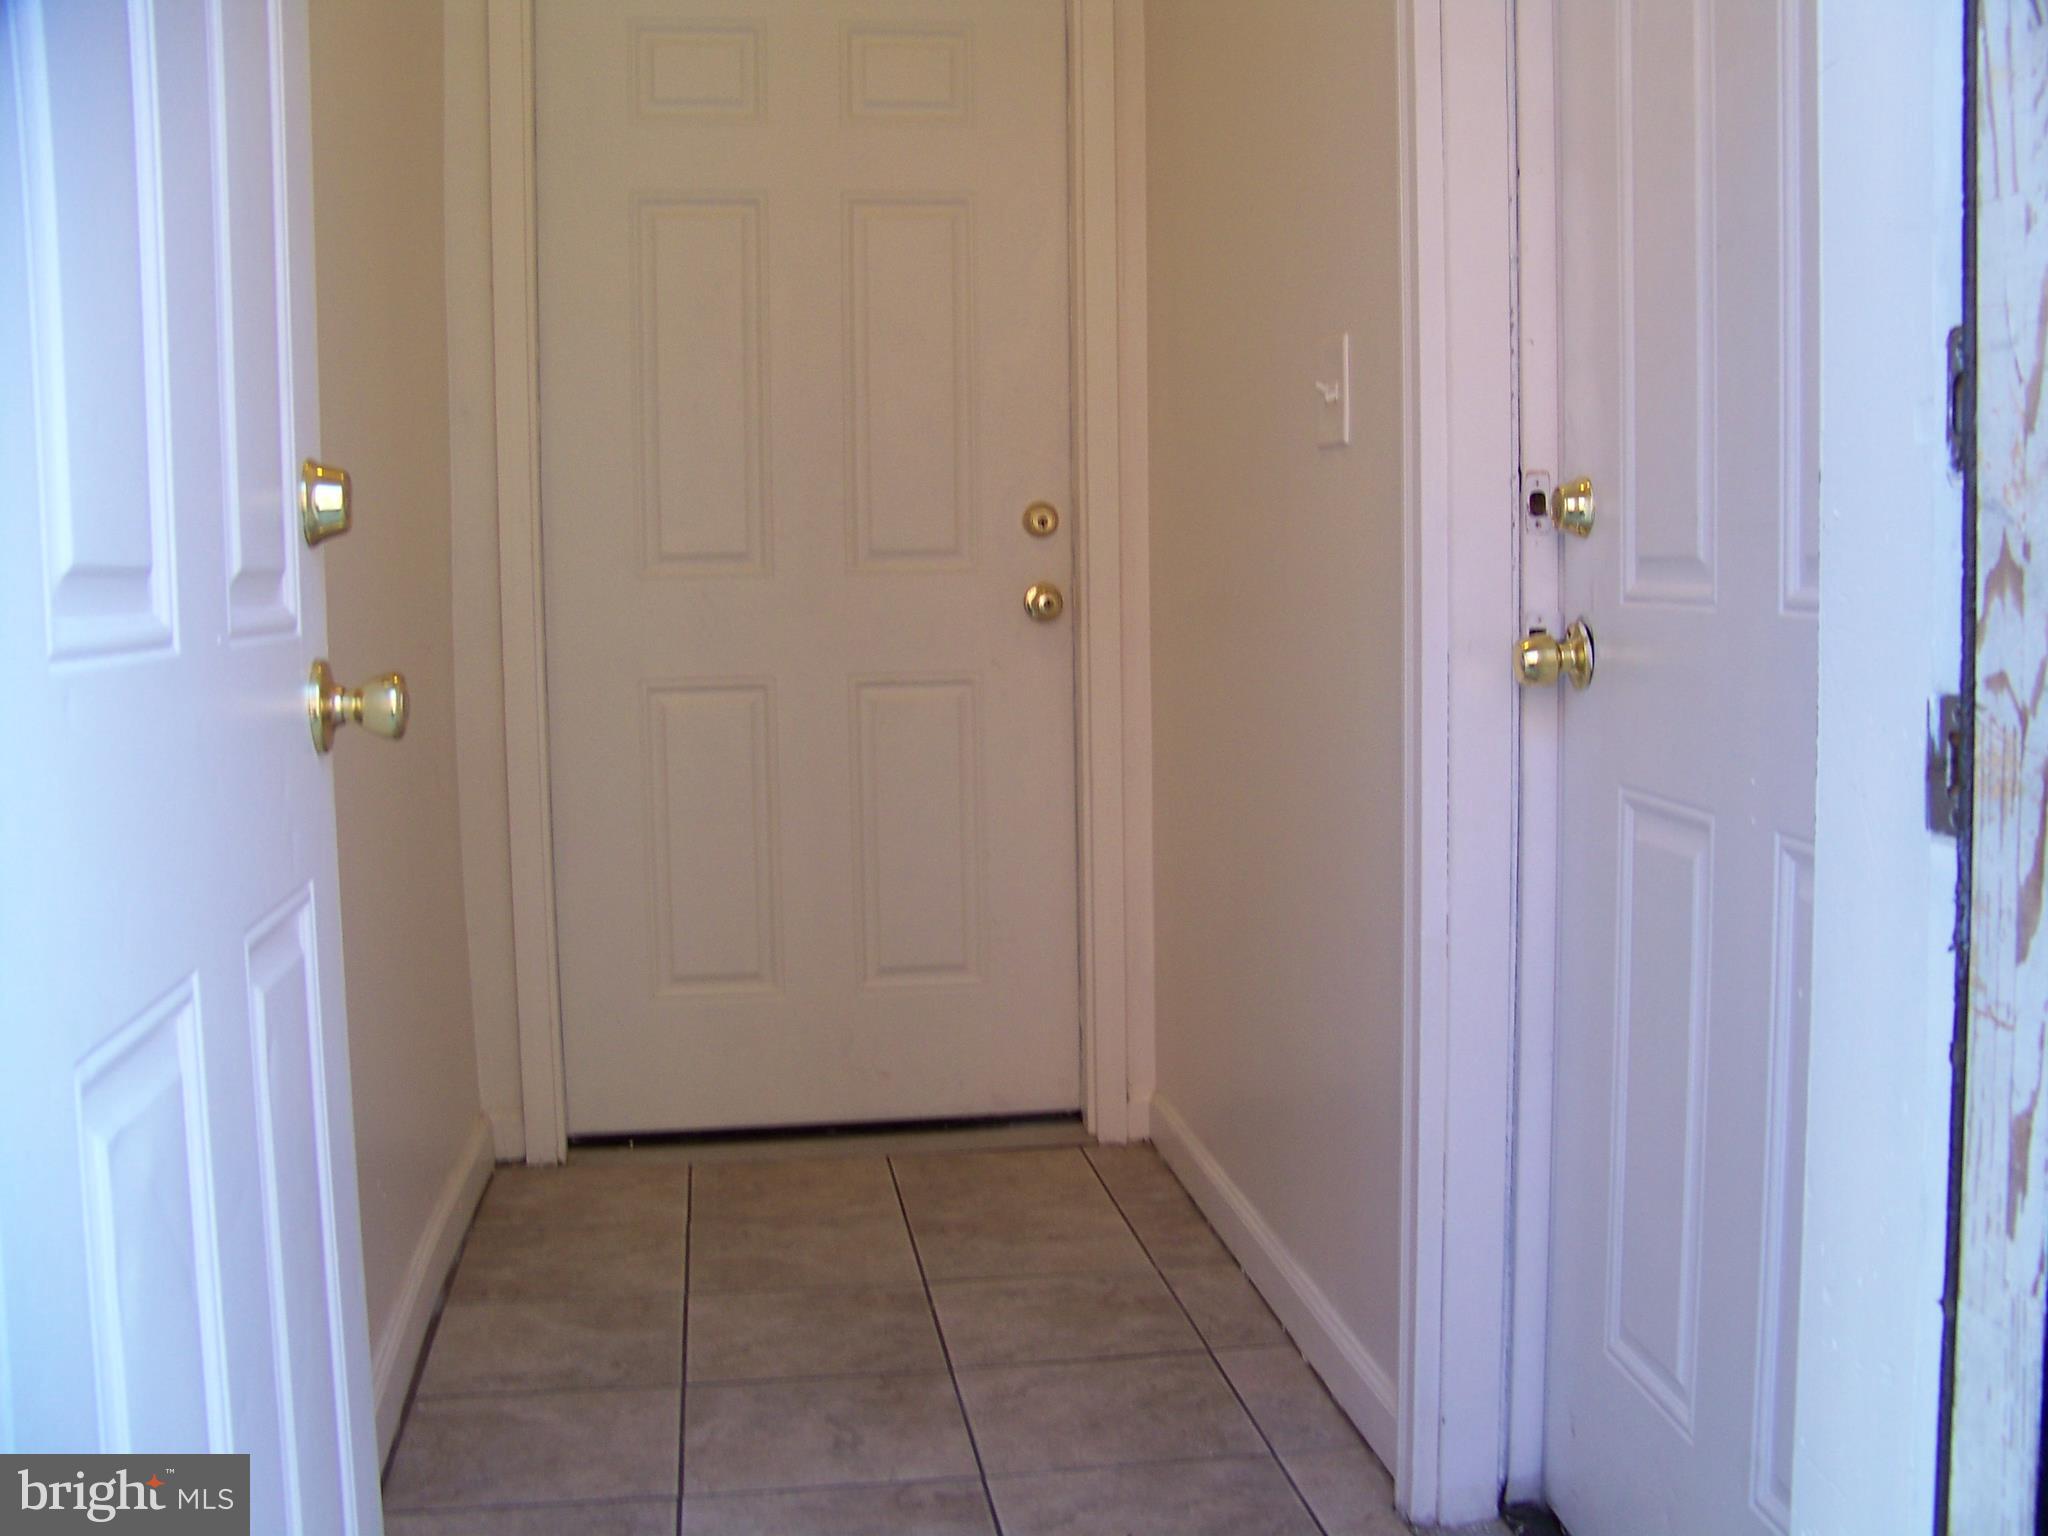 a view of a hallway with closet area